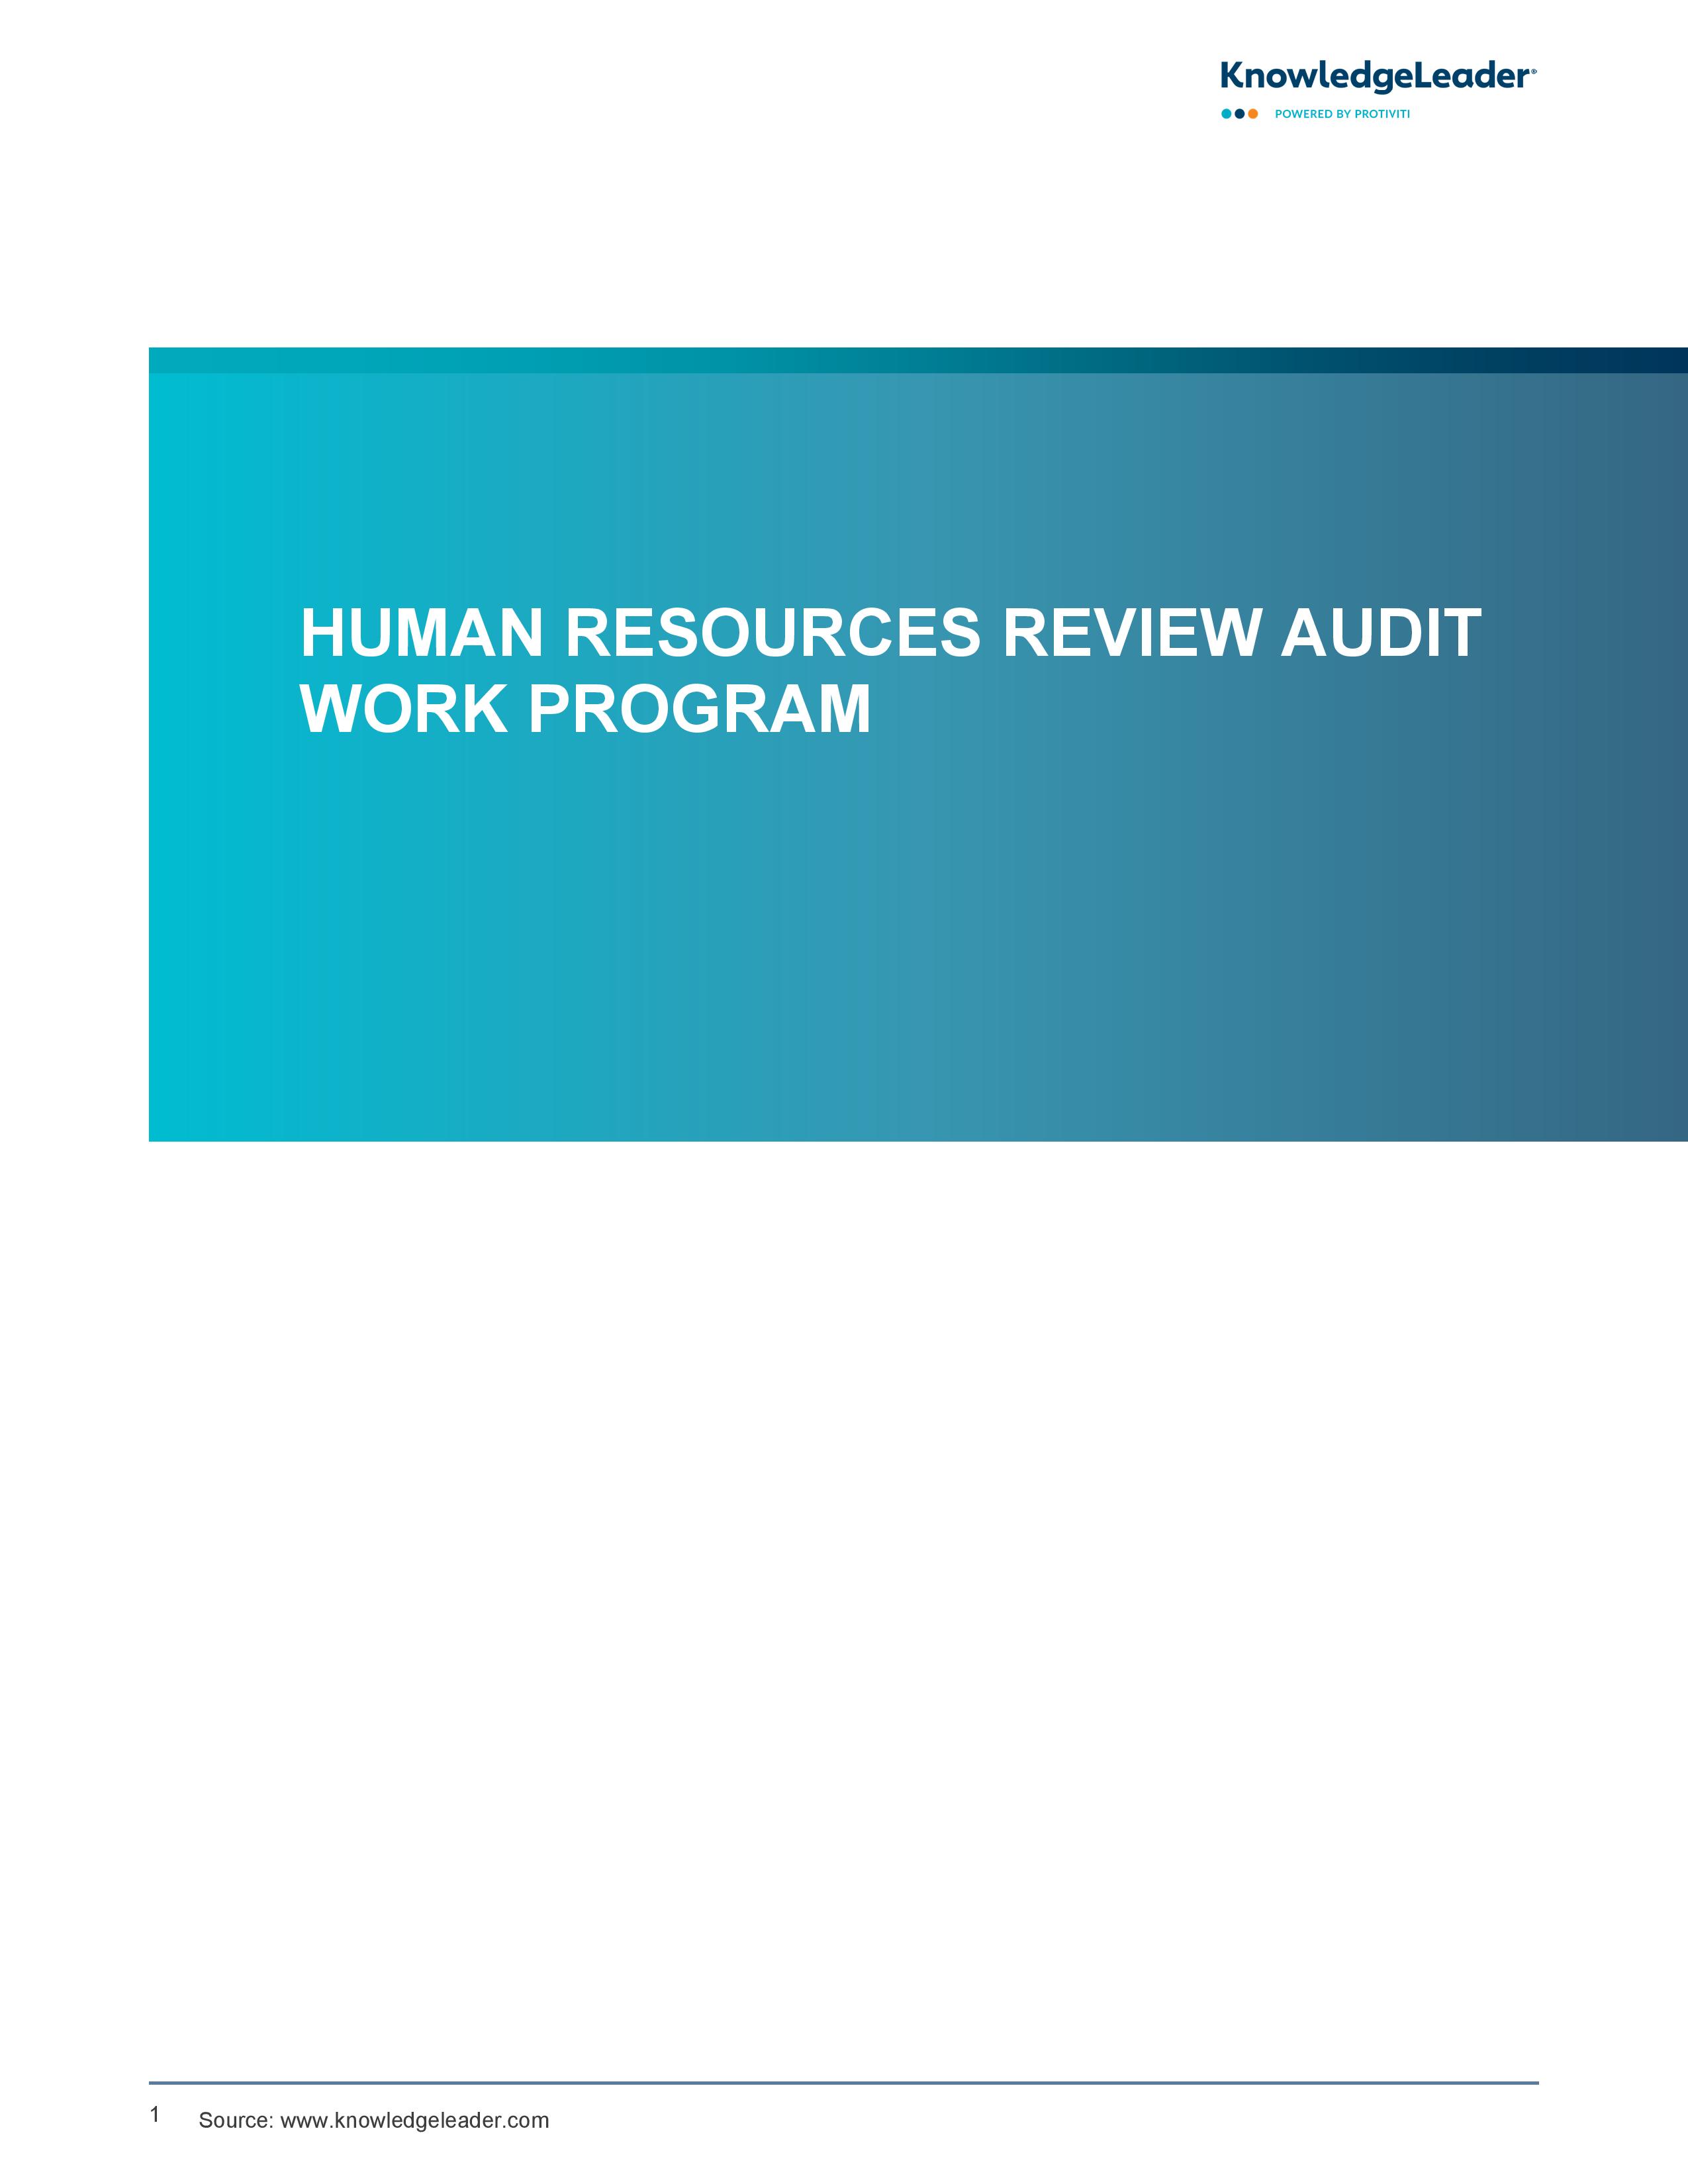 Screenshot of the first page of Human Resources Review Audit Work Program